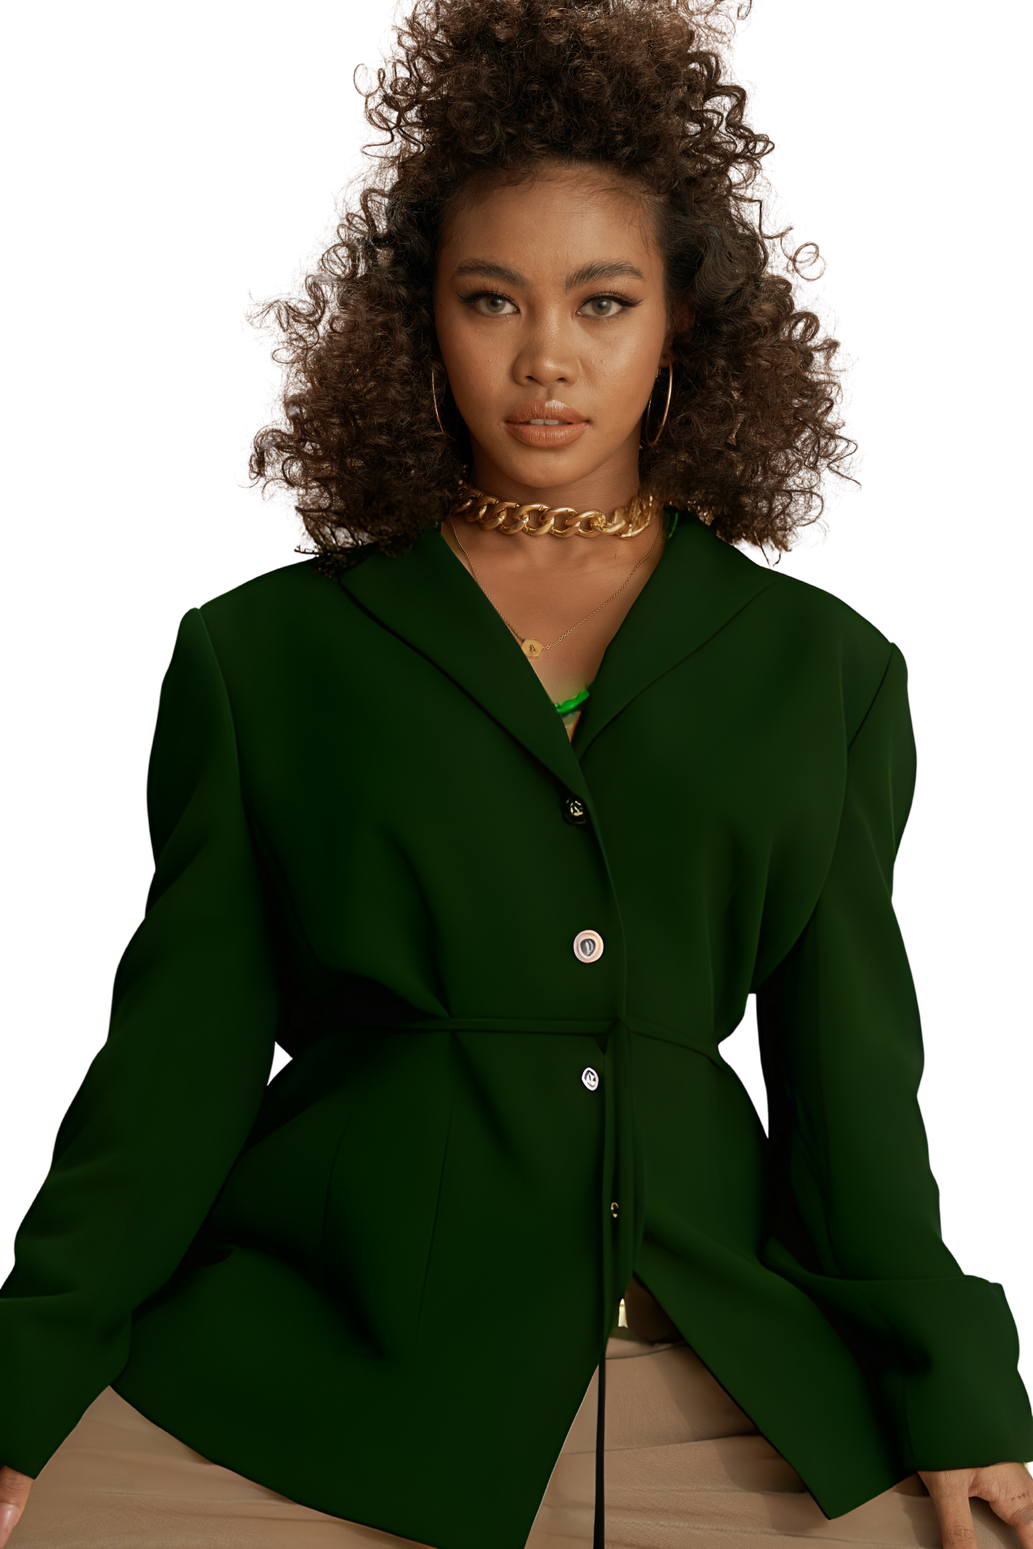 a woman with curly hair wearing a green blazer